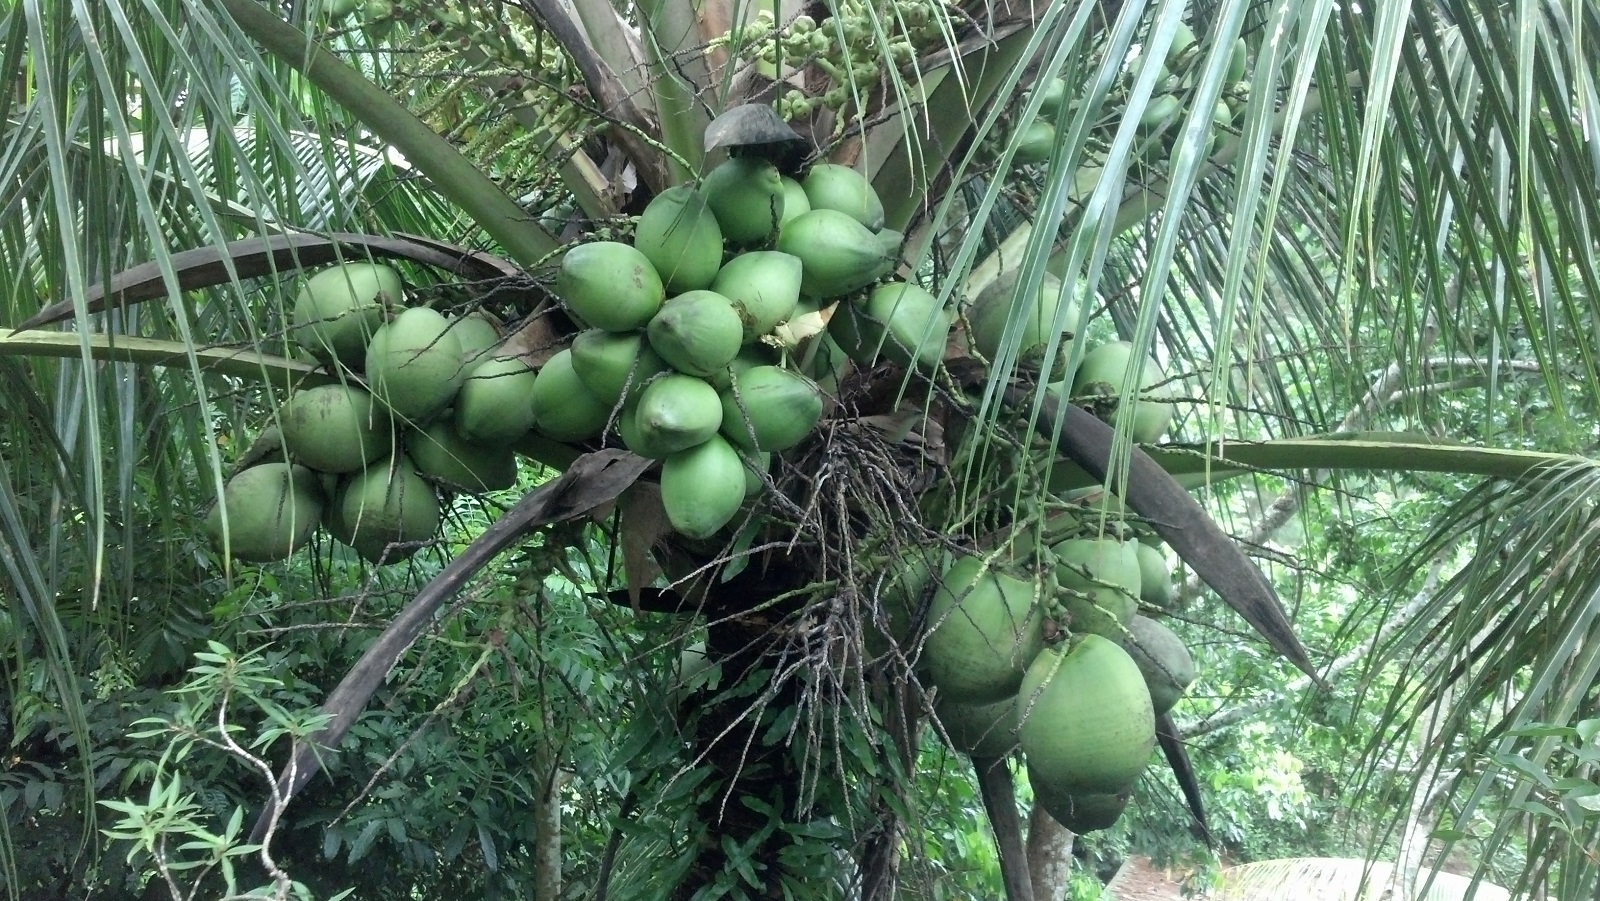 Retreats In Puerto Rico - Among the Coconuts